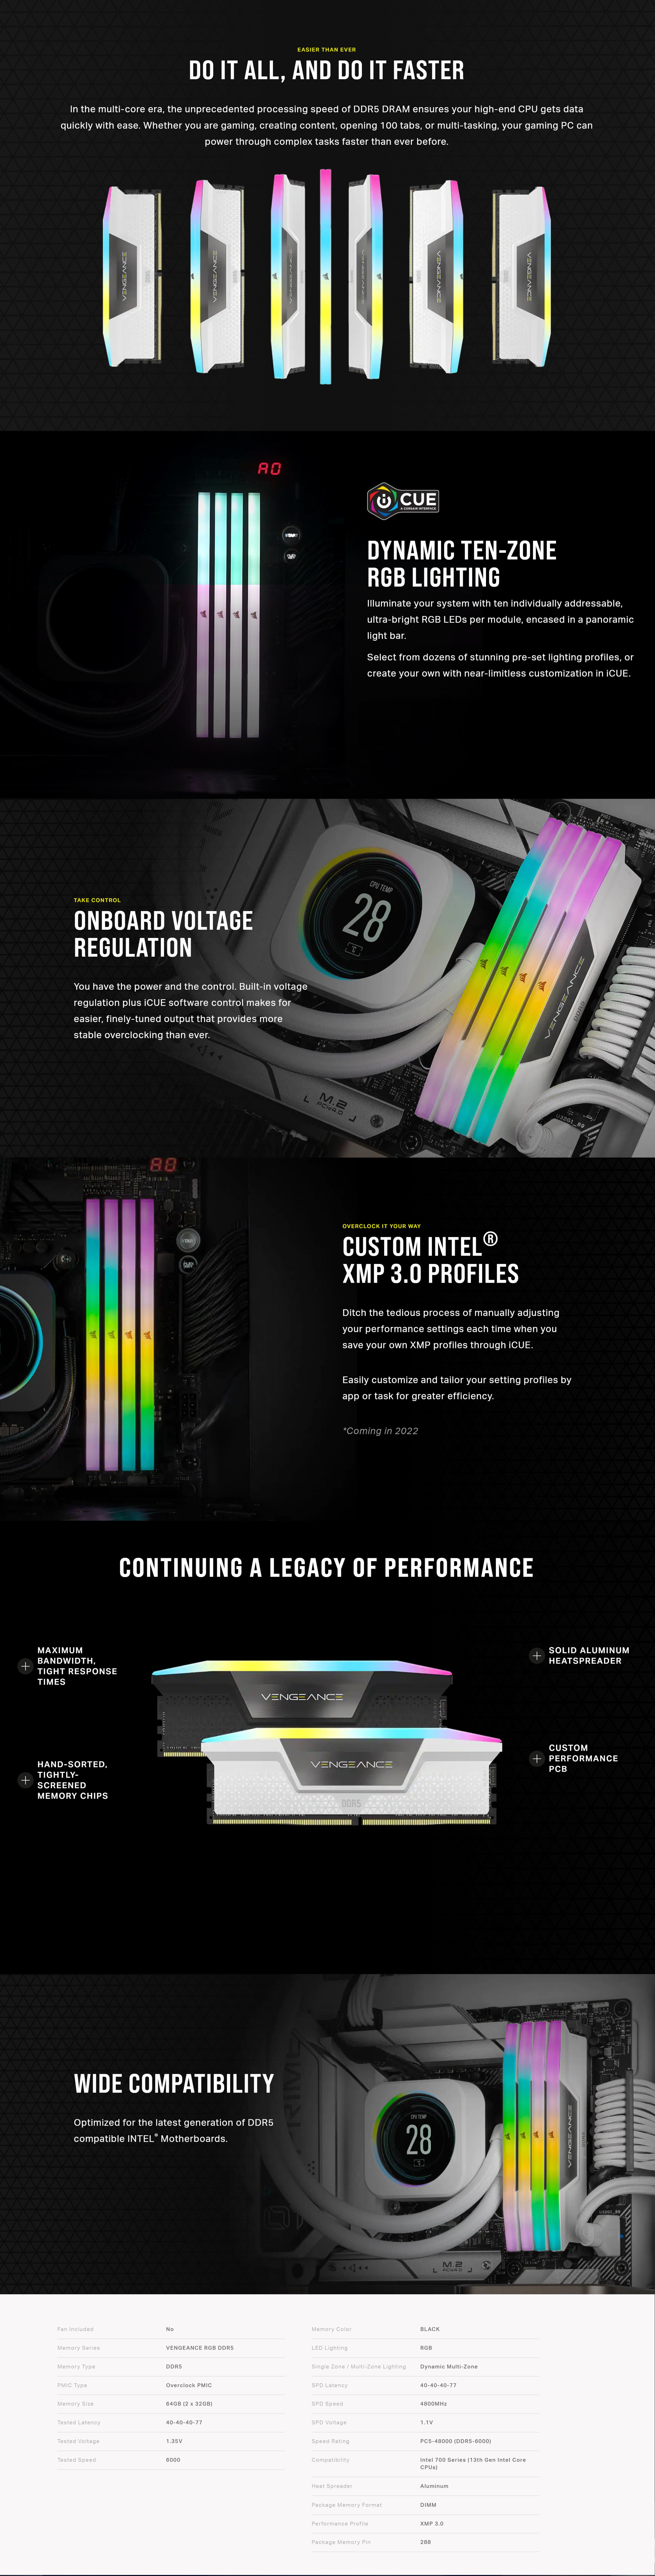 A large marketing image providing additional information about the product Corsair 64GB Kit (2x32GB) DDR5 Vengeance RGB C40 6000MT/s - Black - Additional alt info not provided